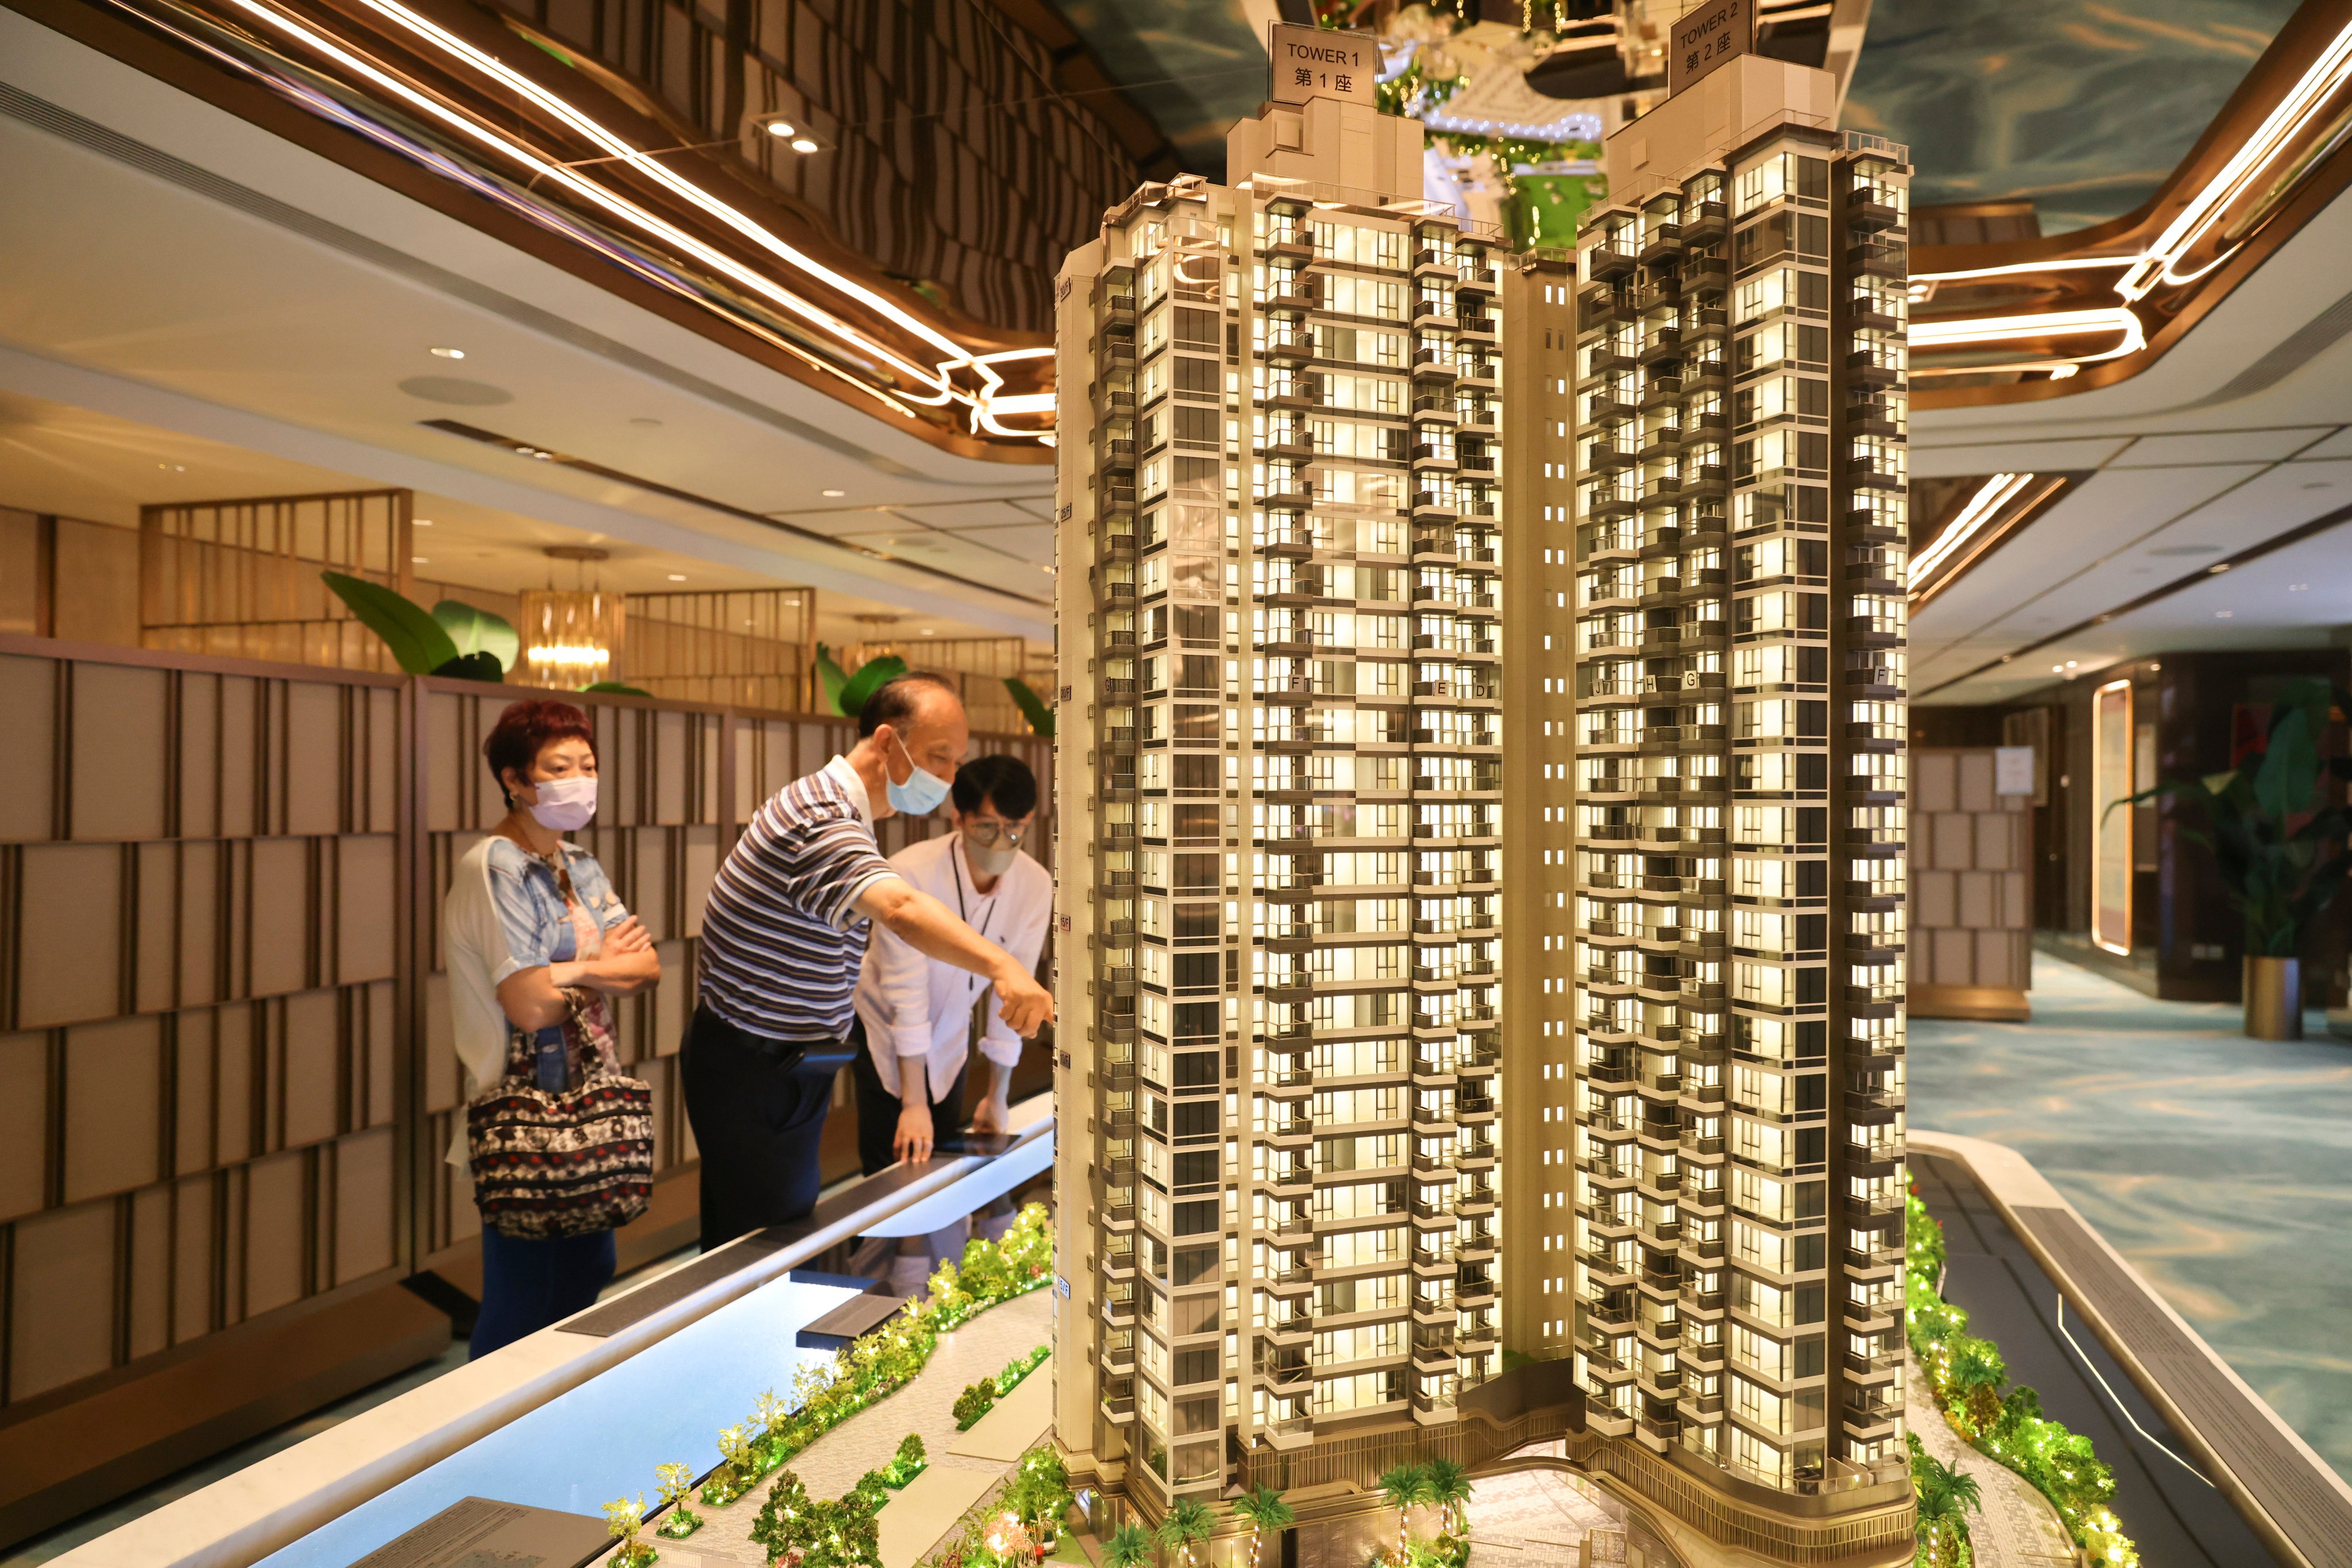 Potential buyers looked at a model of Miami Quay at the developers’ sales room at The Gateway in Tsim Sha Tsui on 18 September 2022. Photo: Dickson Lee